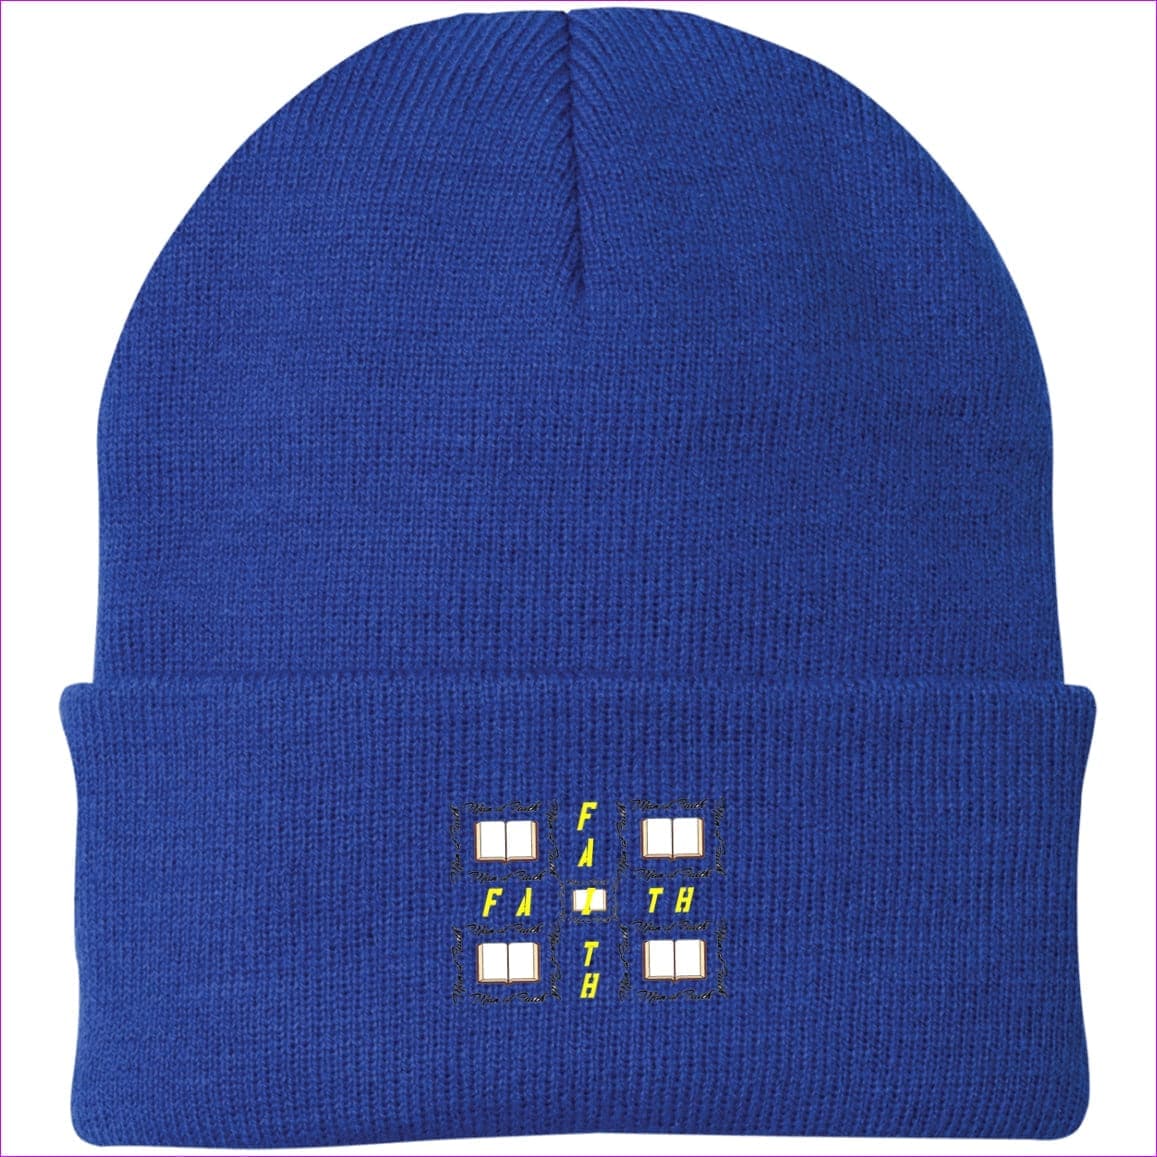 Athletic Royal One Size Man of Faith Embroidered Port Authority Knit Cap - Hats at TFC&H Co.